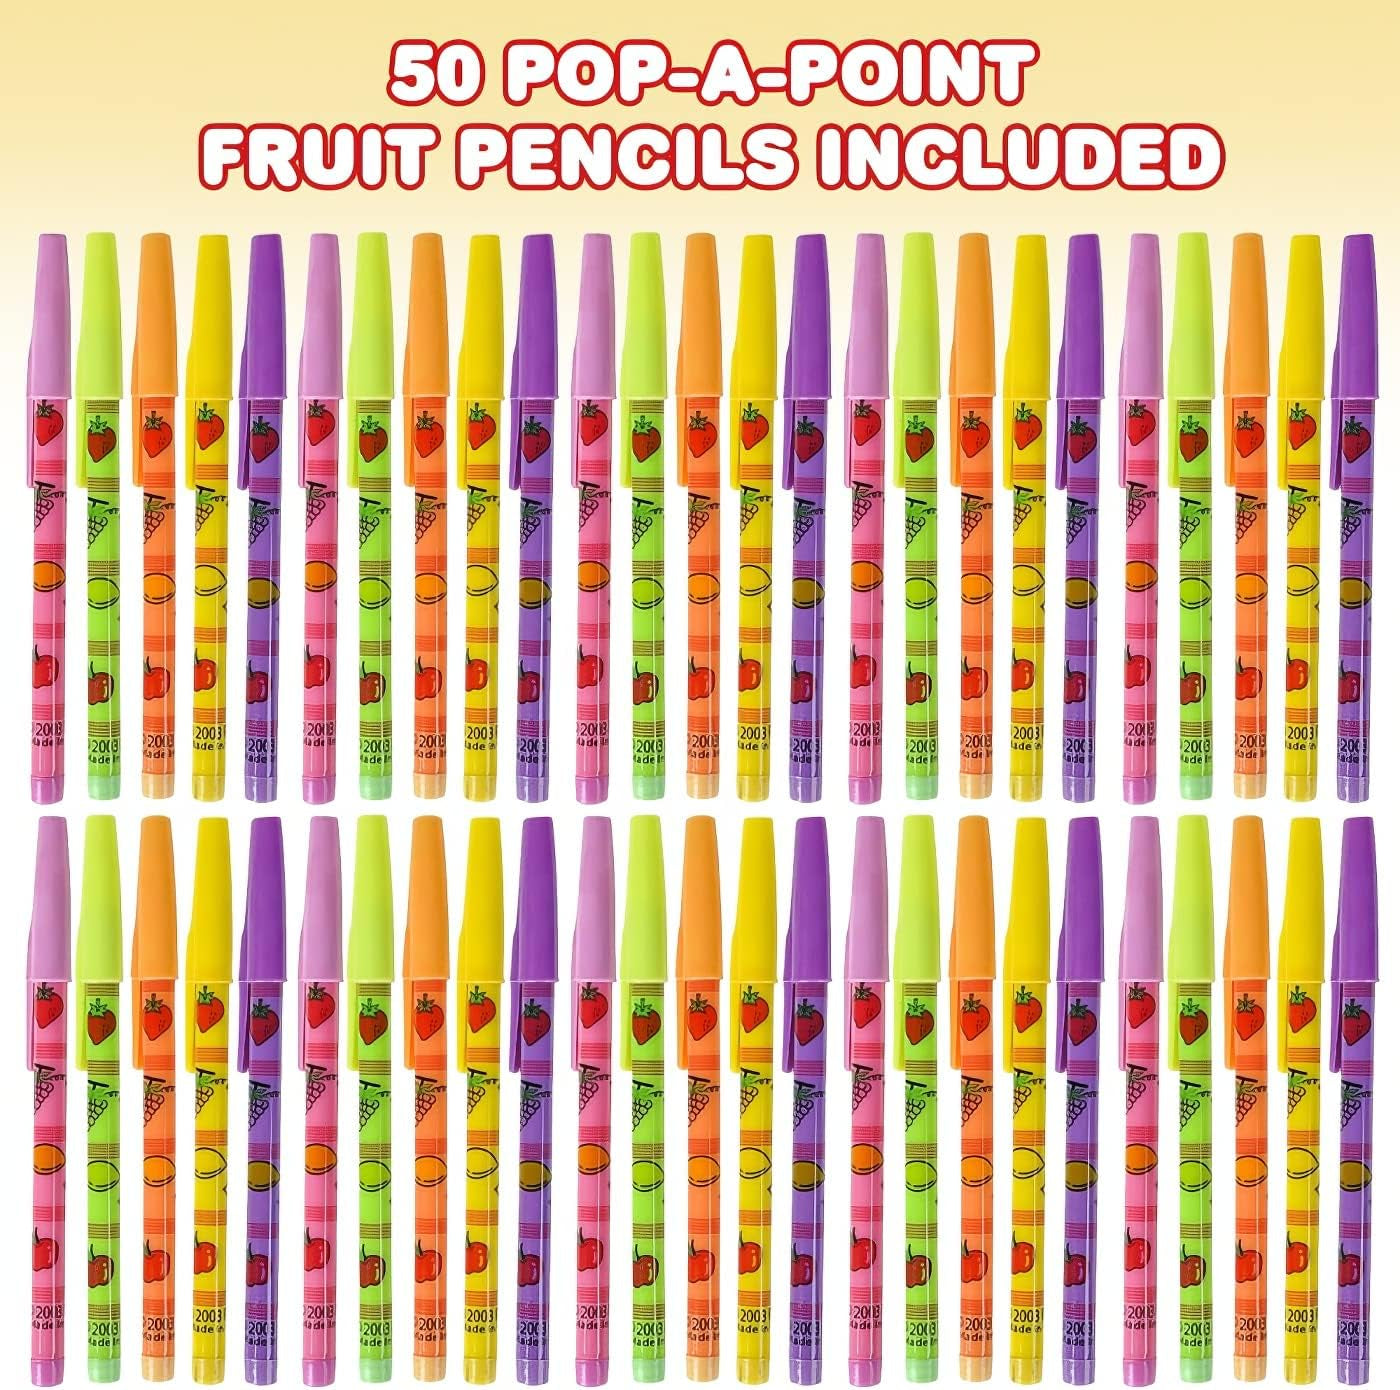 Pop a Point Fruit Pencils, Bulk Set of 50, Non-Sharpening Pencils with Fruity Prints, School Stationery Supplies, Teacher Rewards, Cute Party Favors for Kids and Adults, Assorted Colors